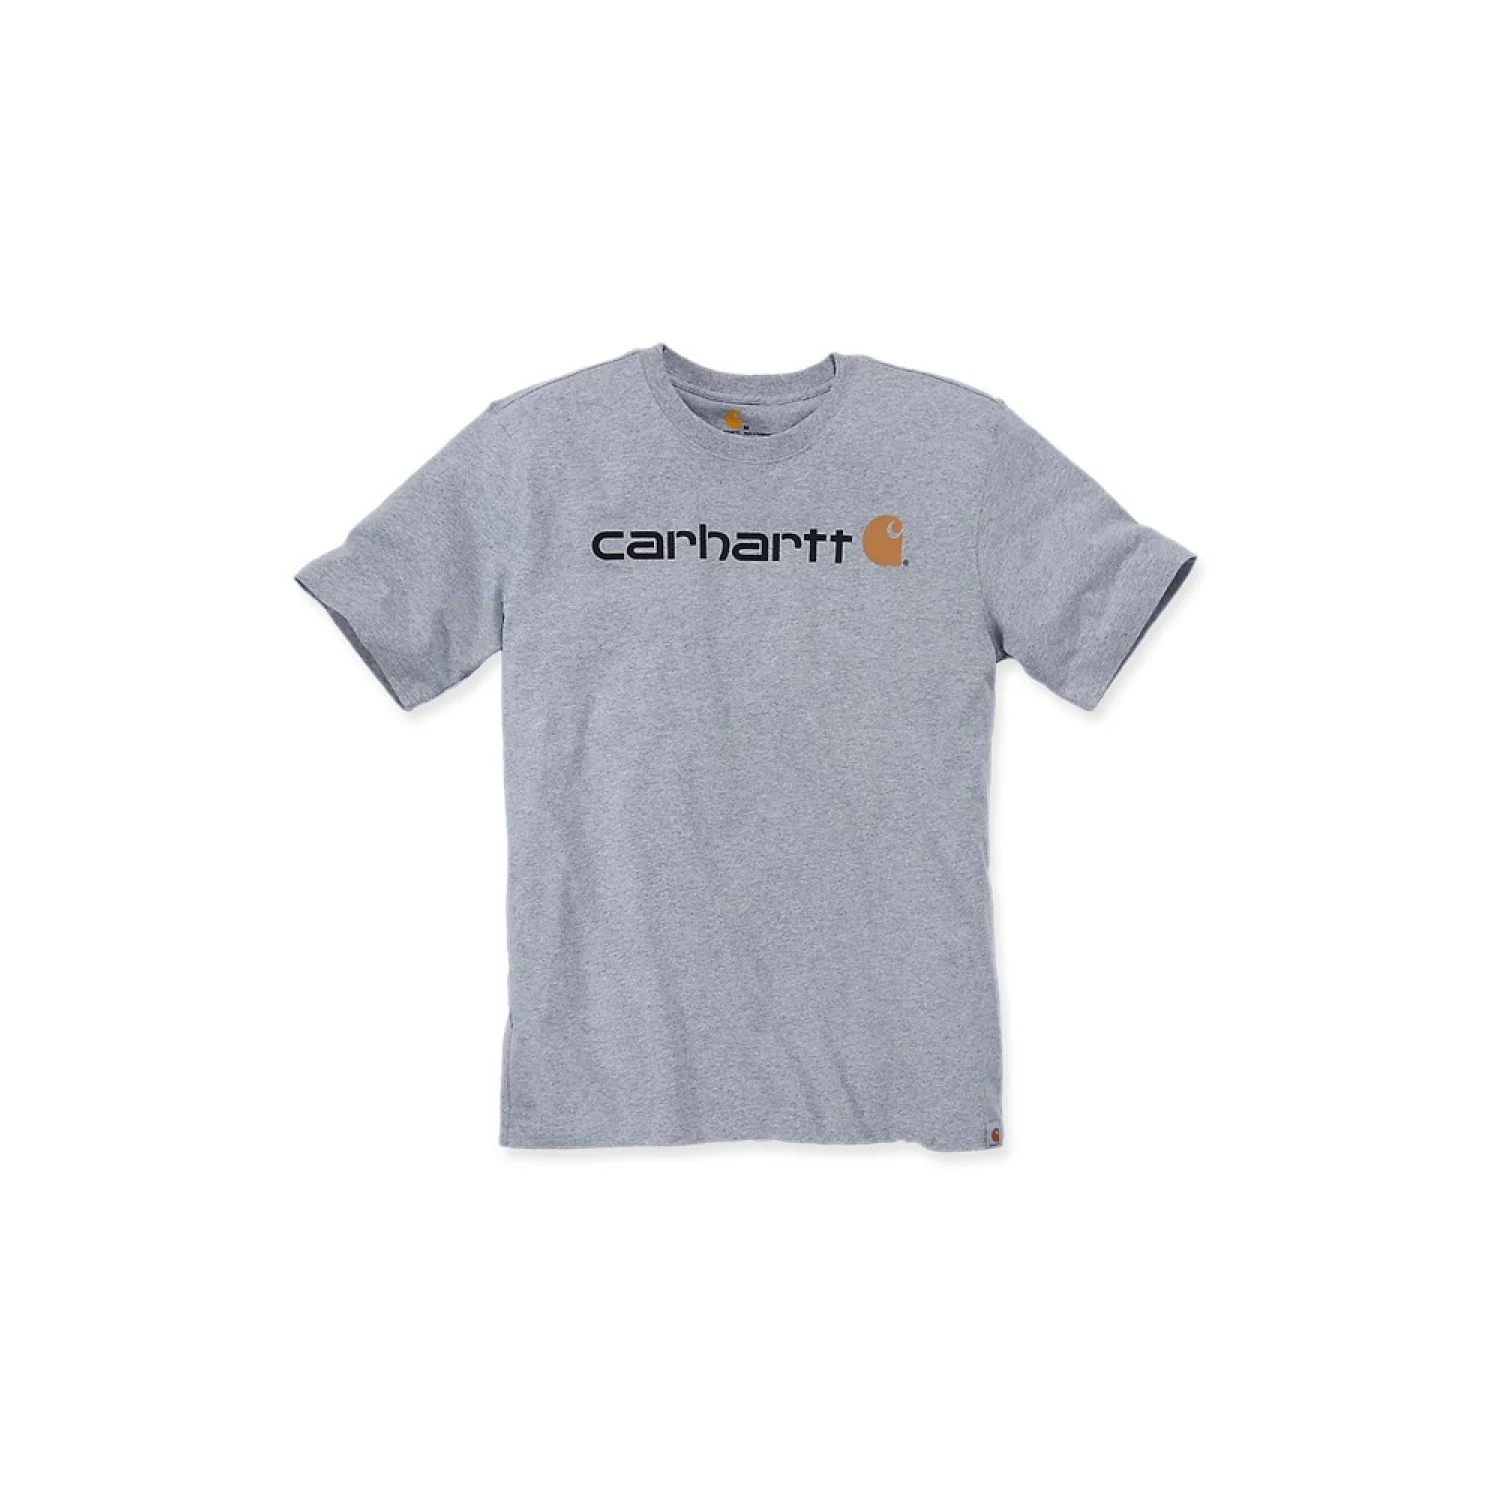 Carhartt 103361 Core Logo T-Shirt - Relaxed Fit - Heather Grey - M